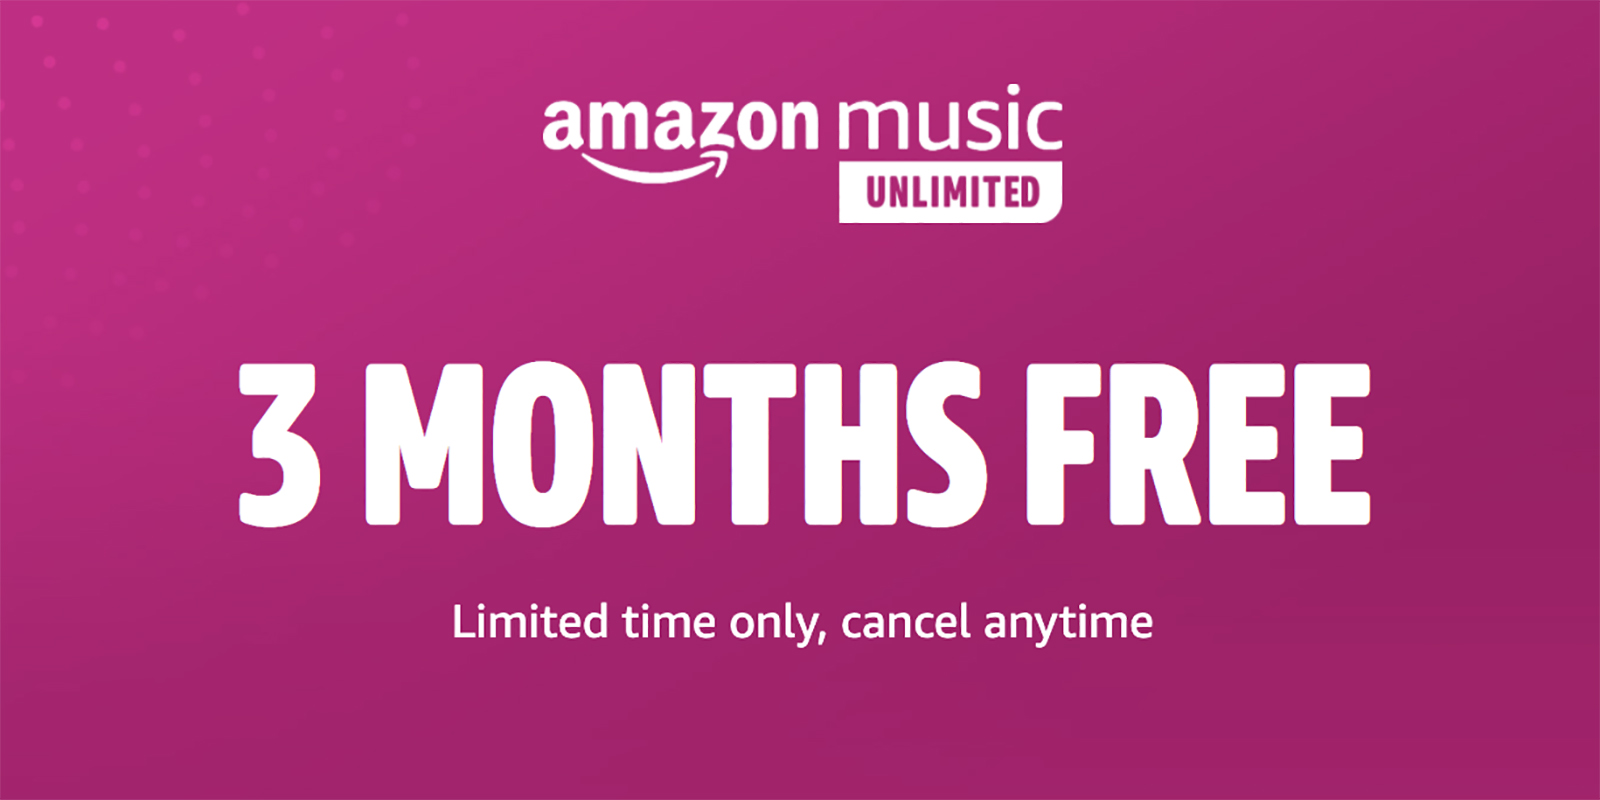 amazon music unlimited deal